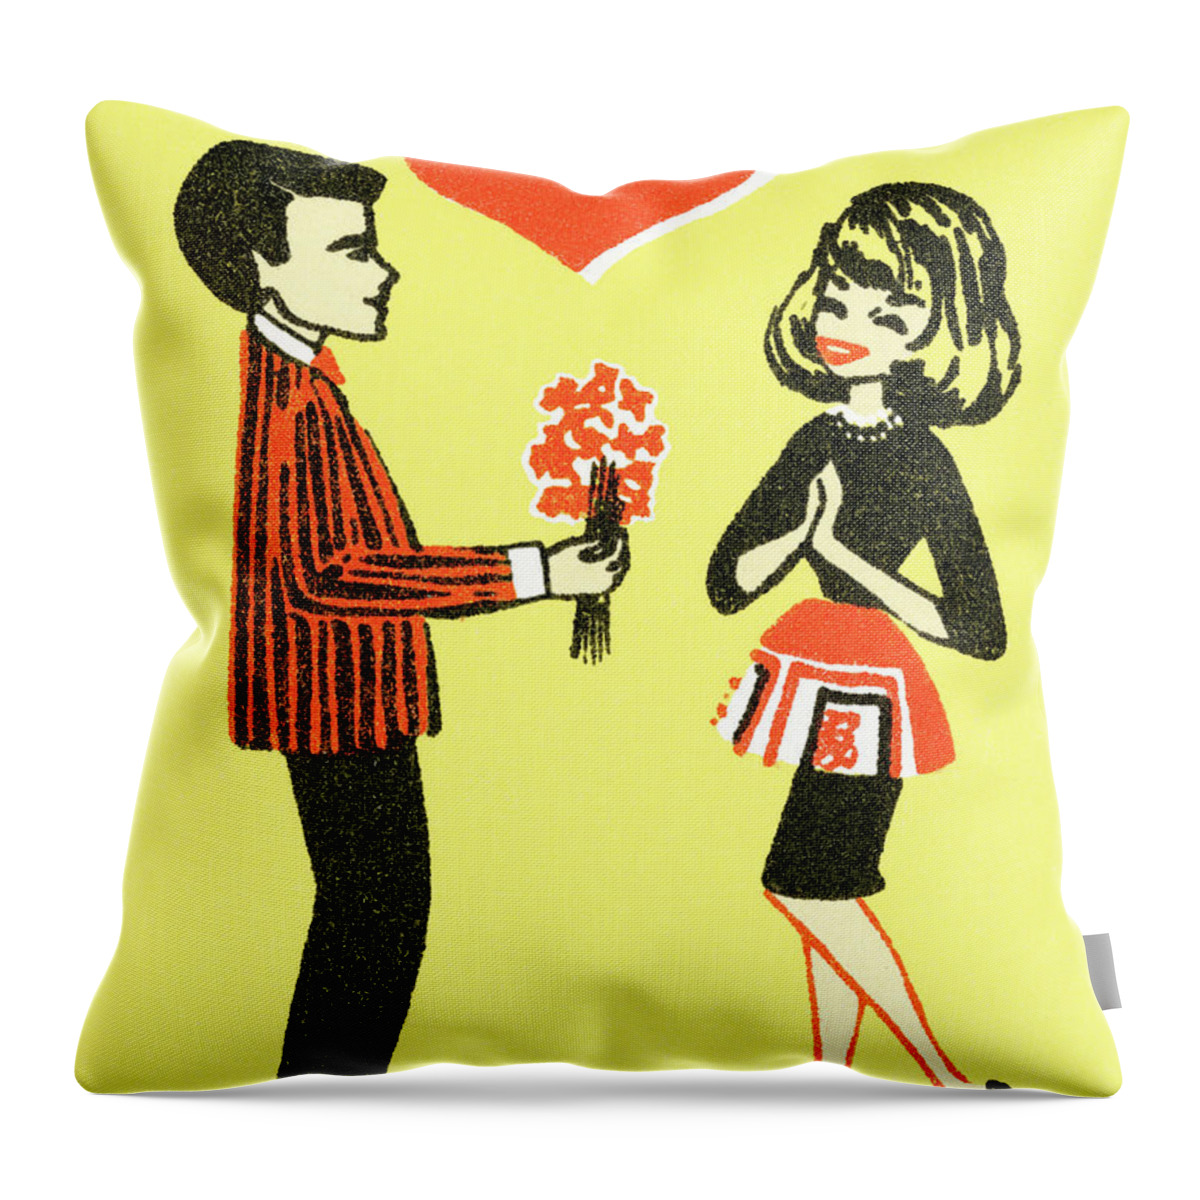 Adult Throw Pillow featuring the drawing Man with flowers for woman by CSA Images